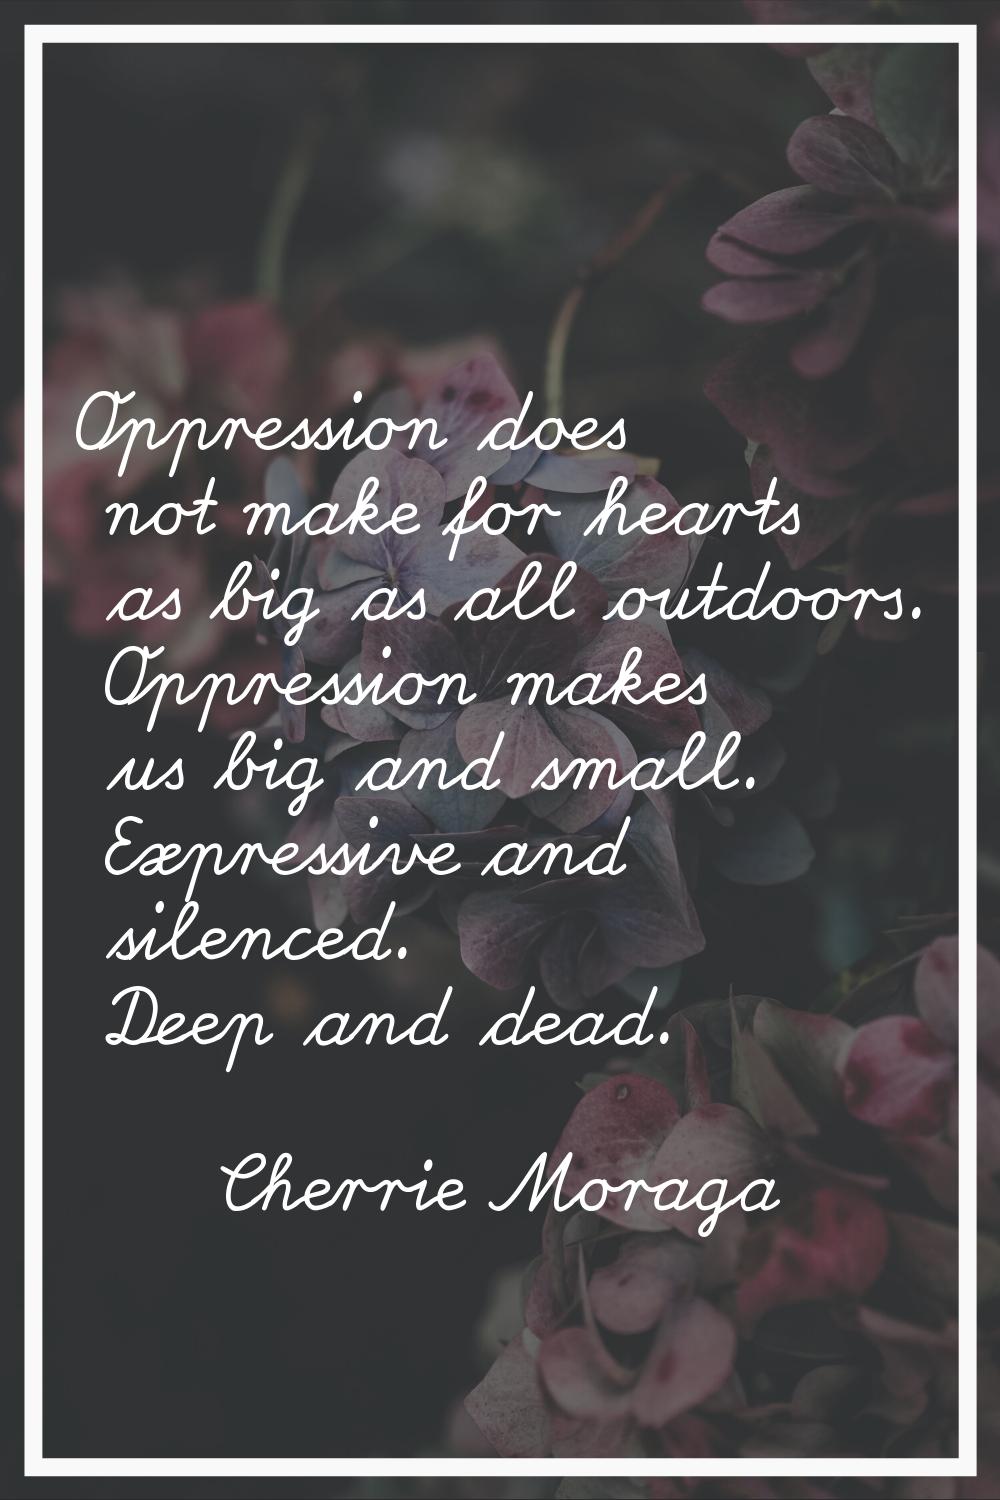 Oppression does not make for hearts as big as all outdoors. Oppression makes us big and small. Expr